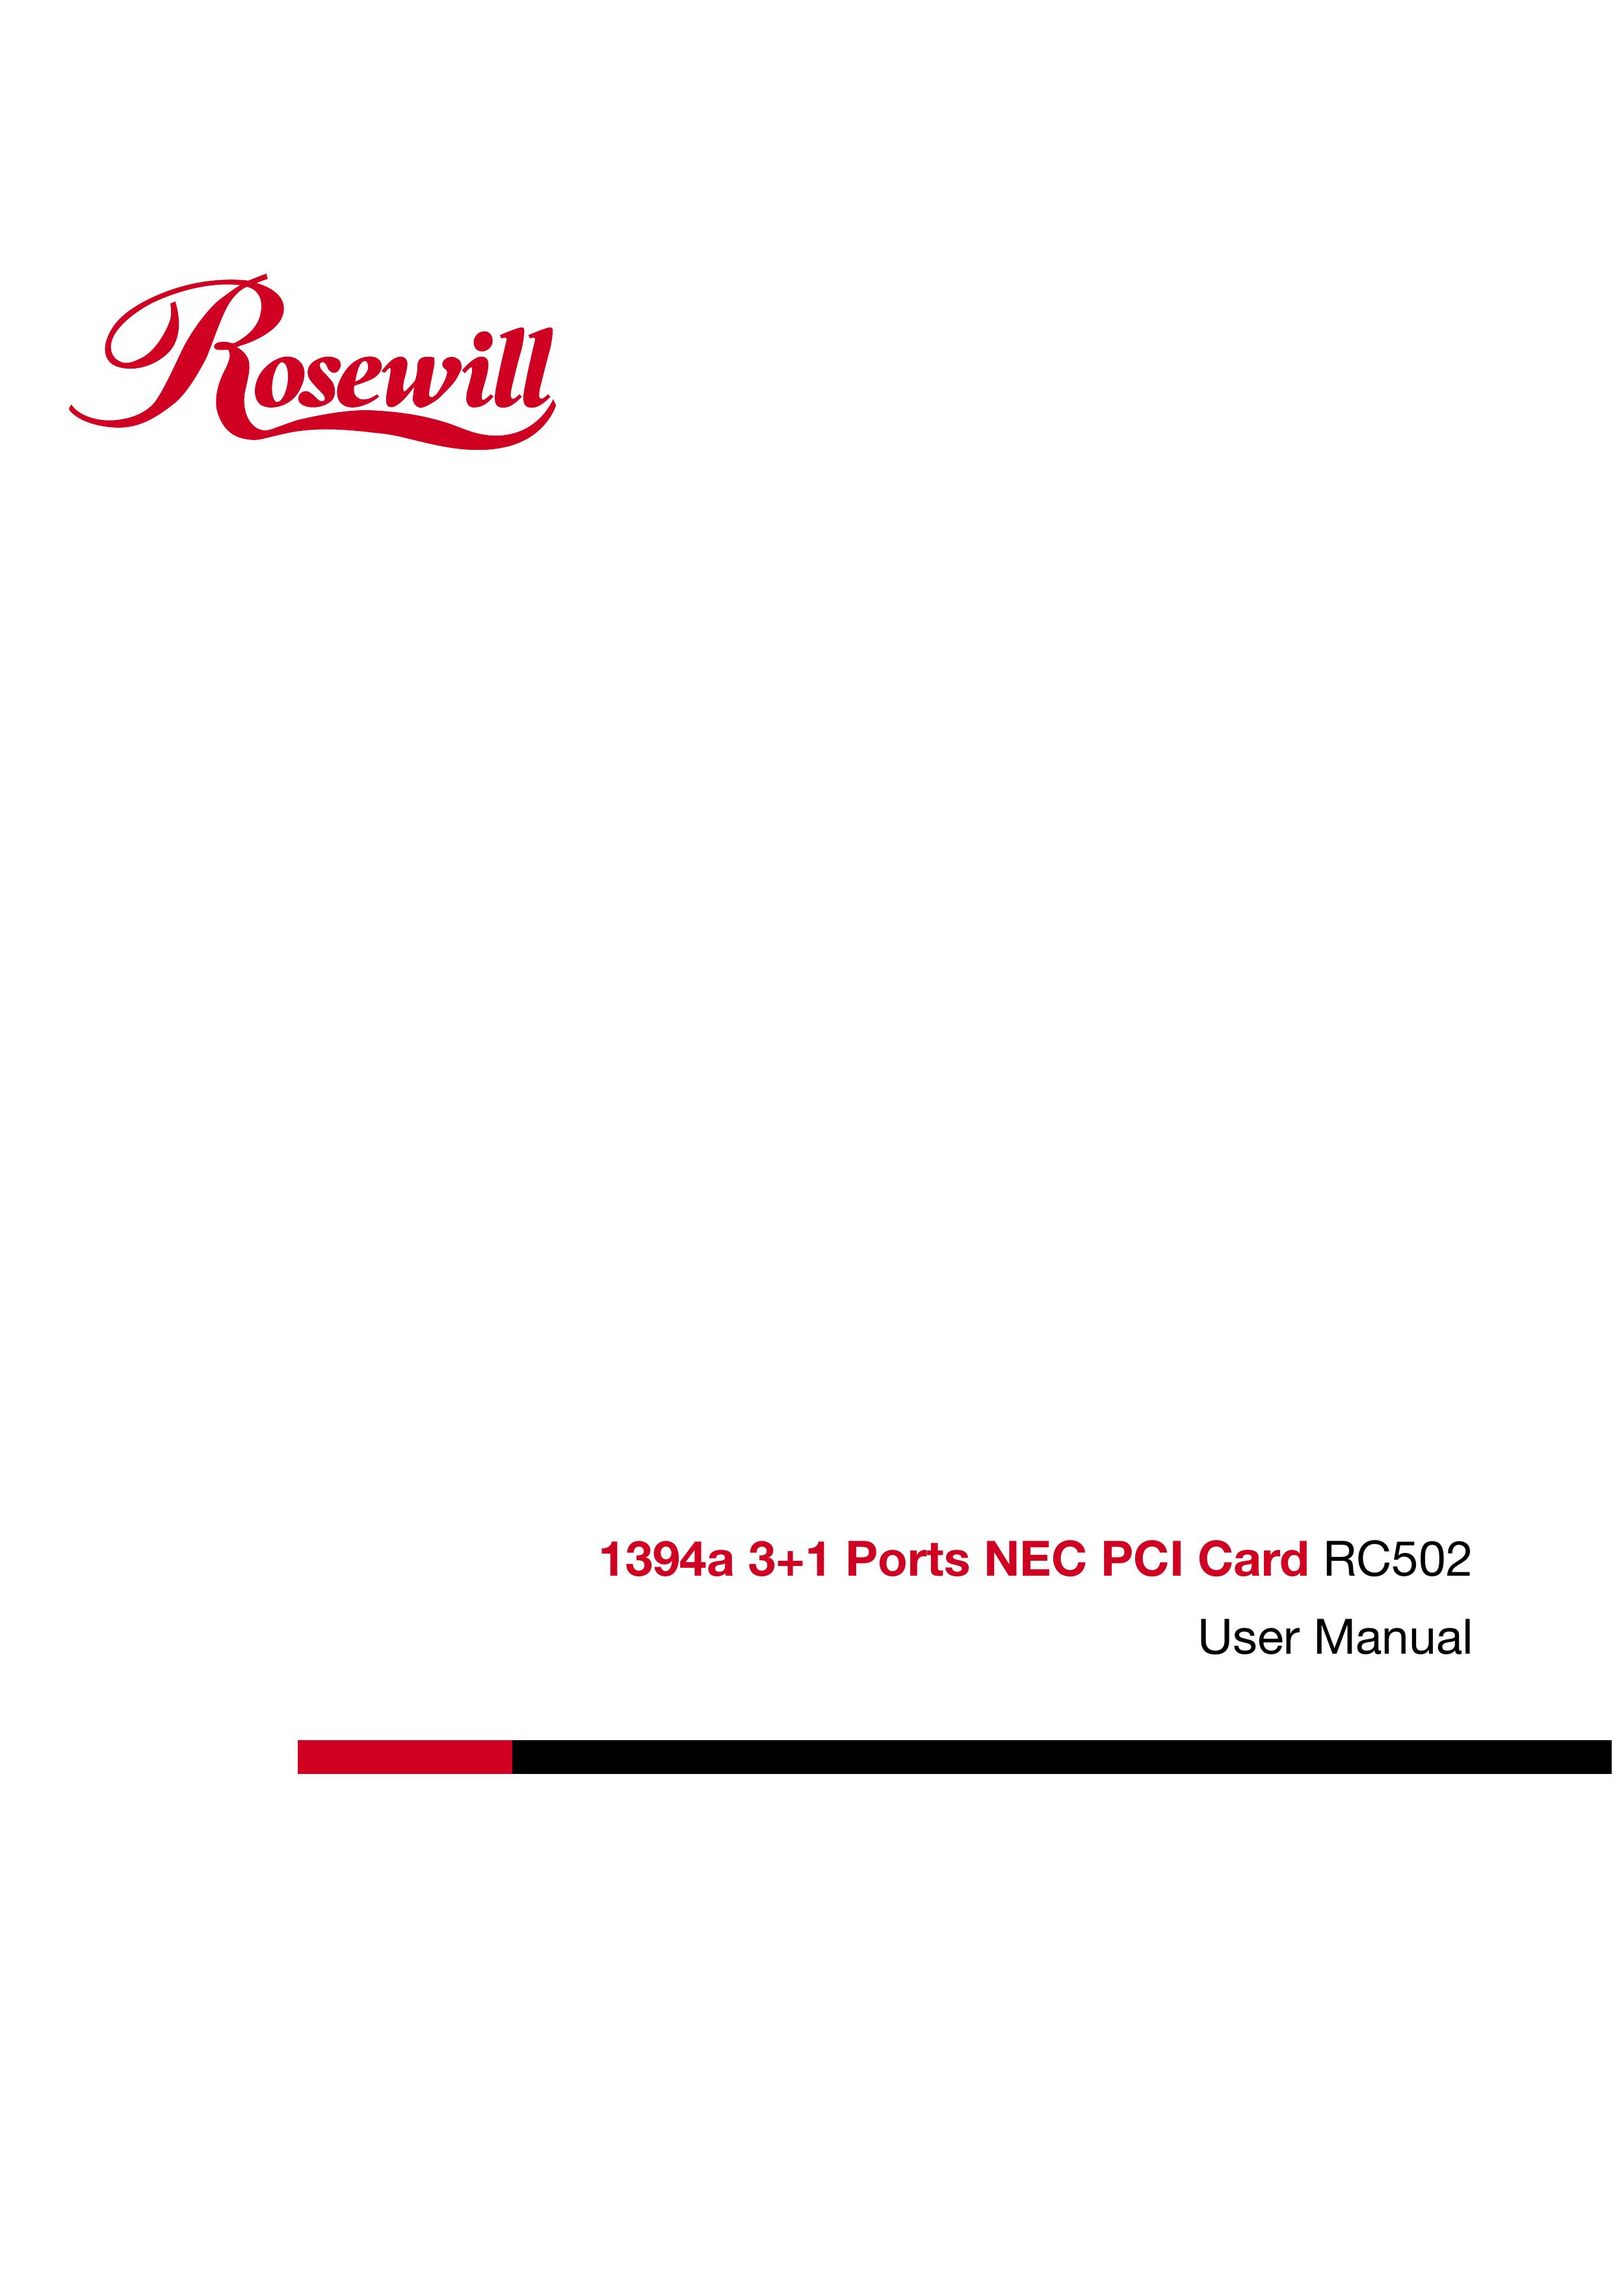 Rosewill RC-502 Network Card User Manual